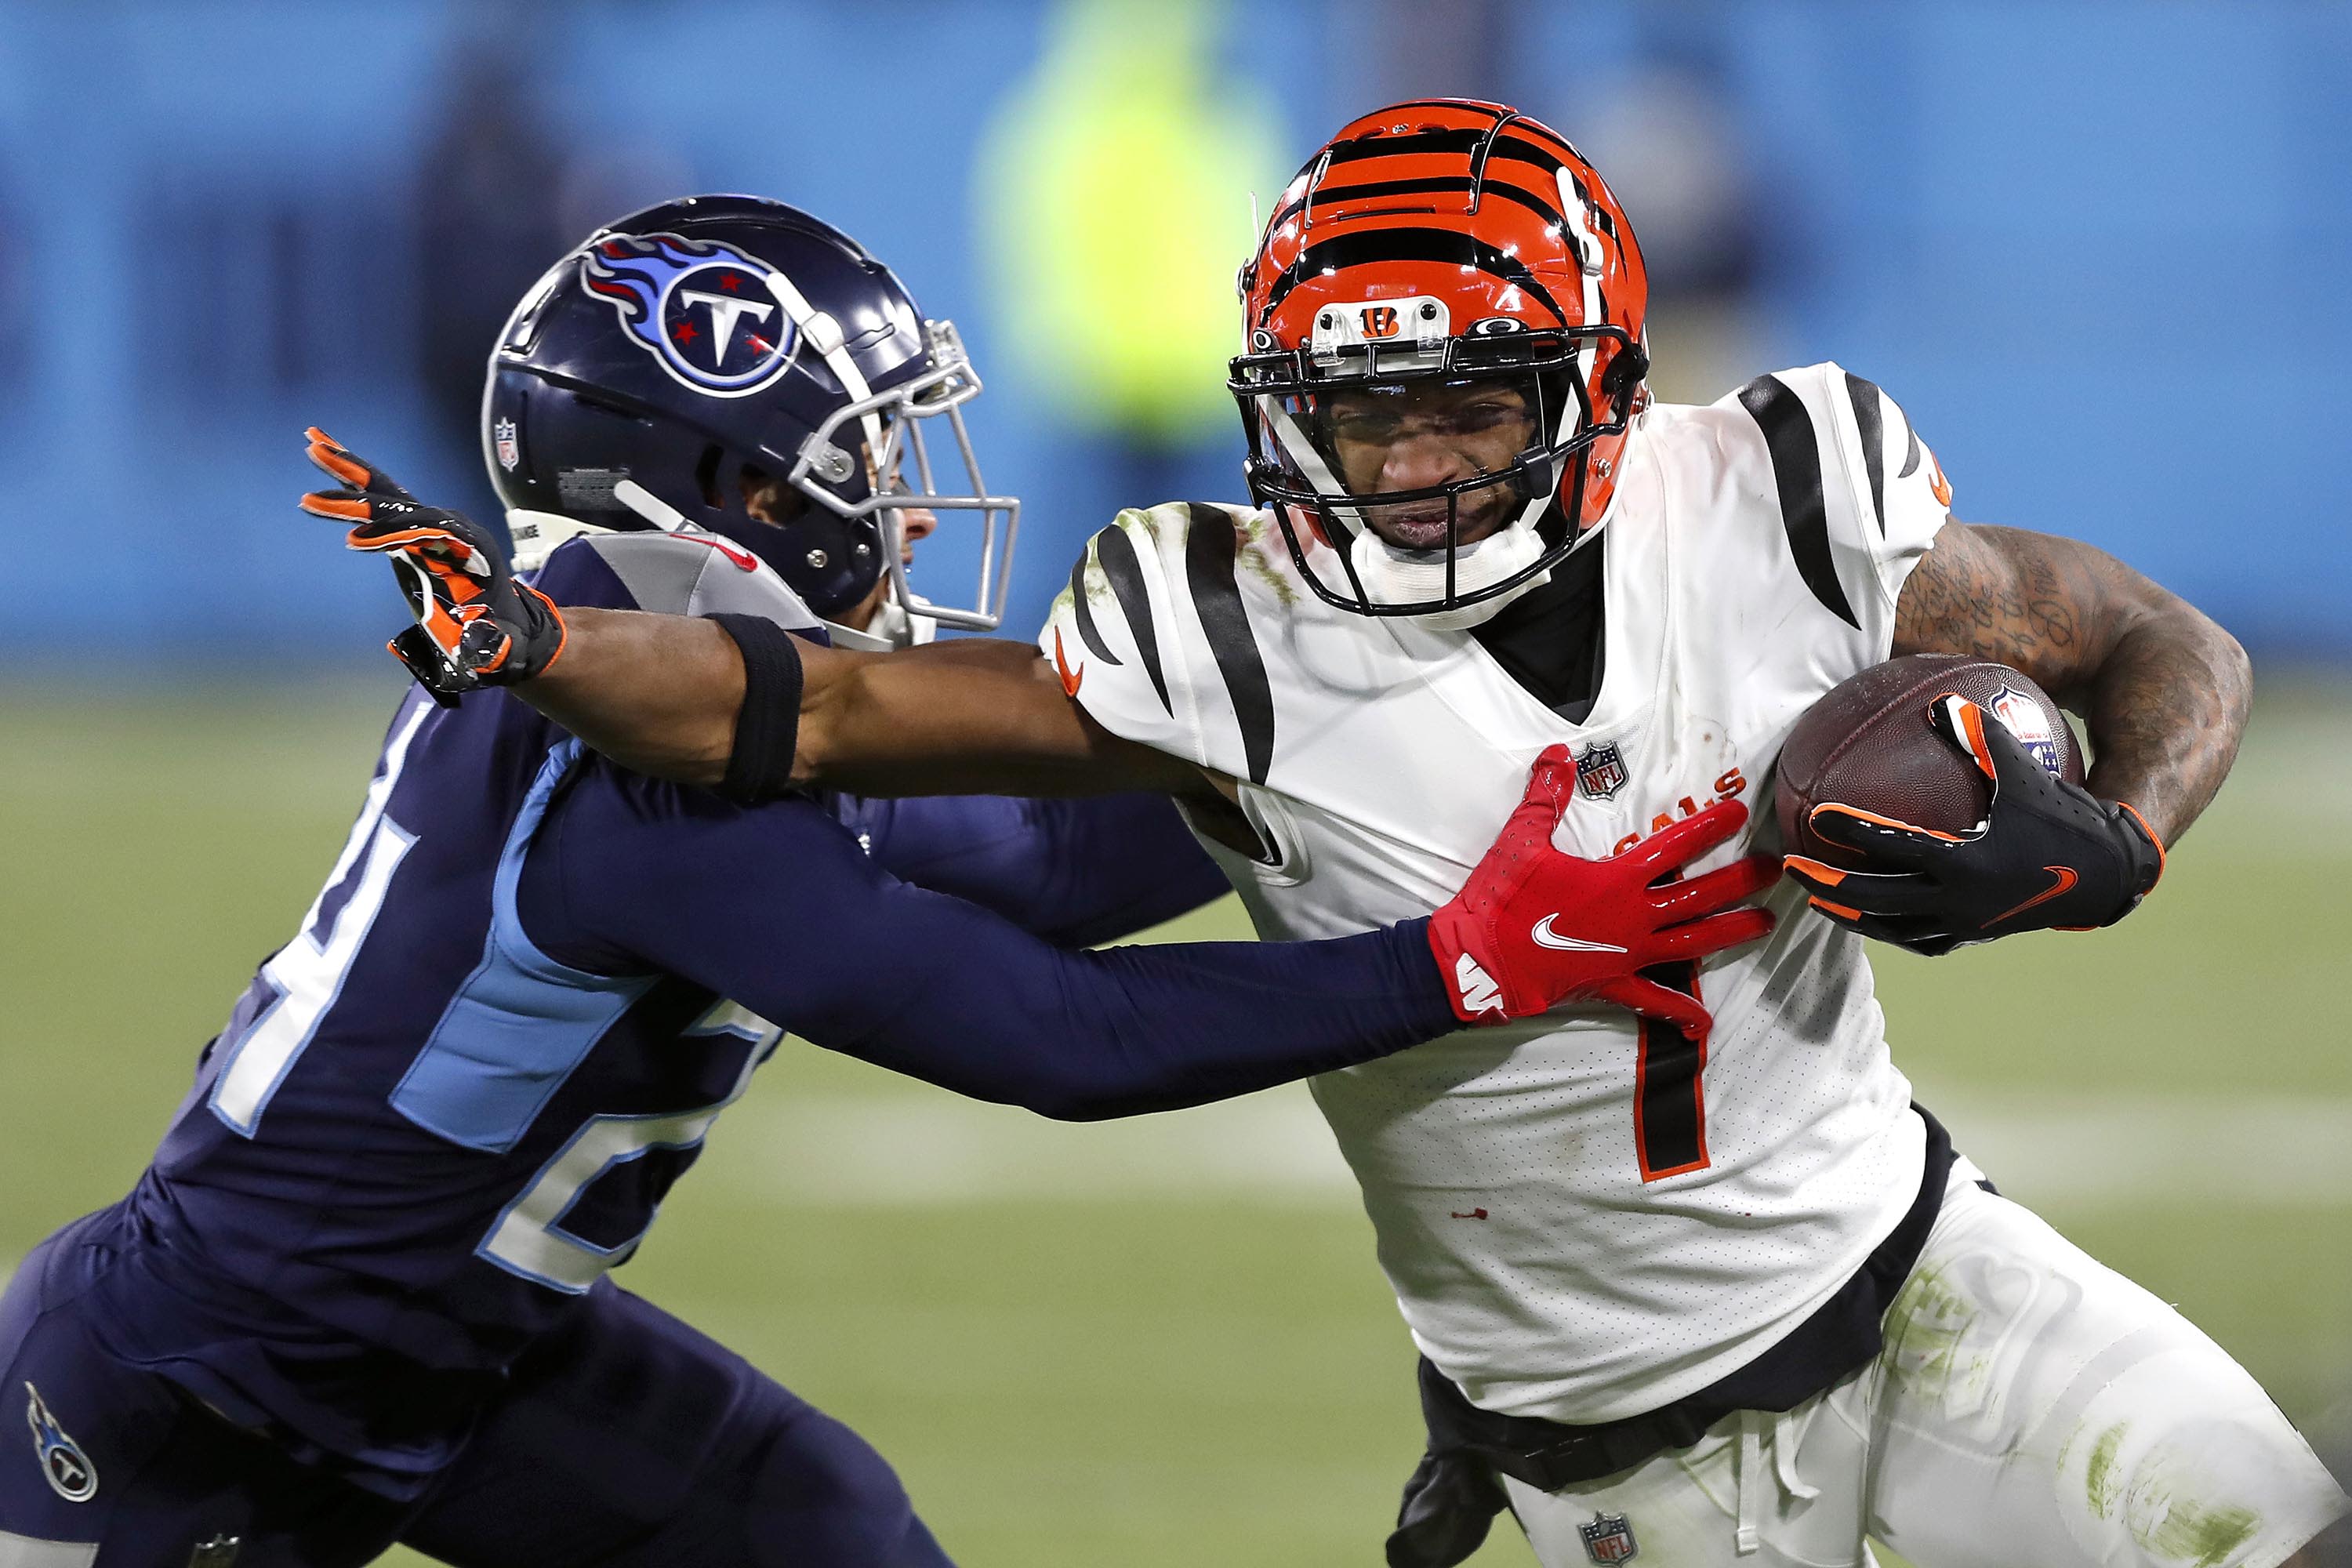 Bengals beat Raiders for first playoff win in 31 years